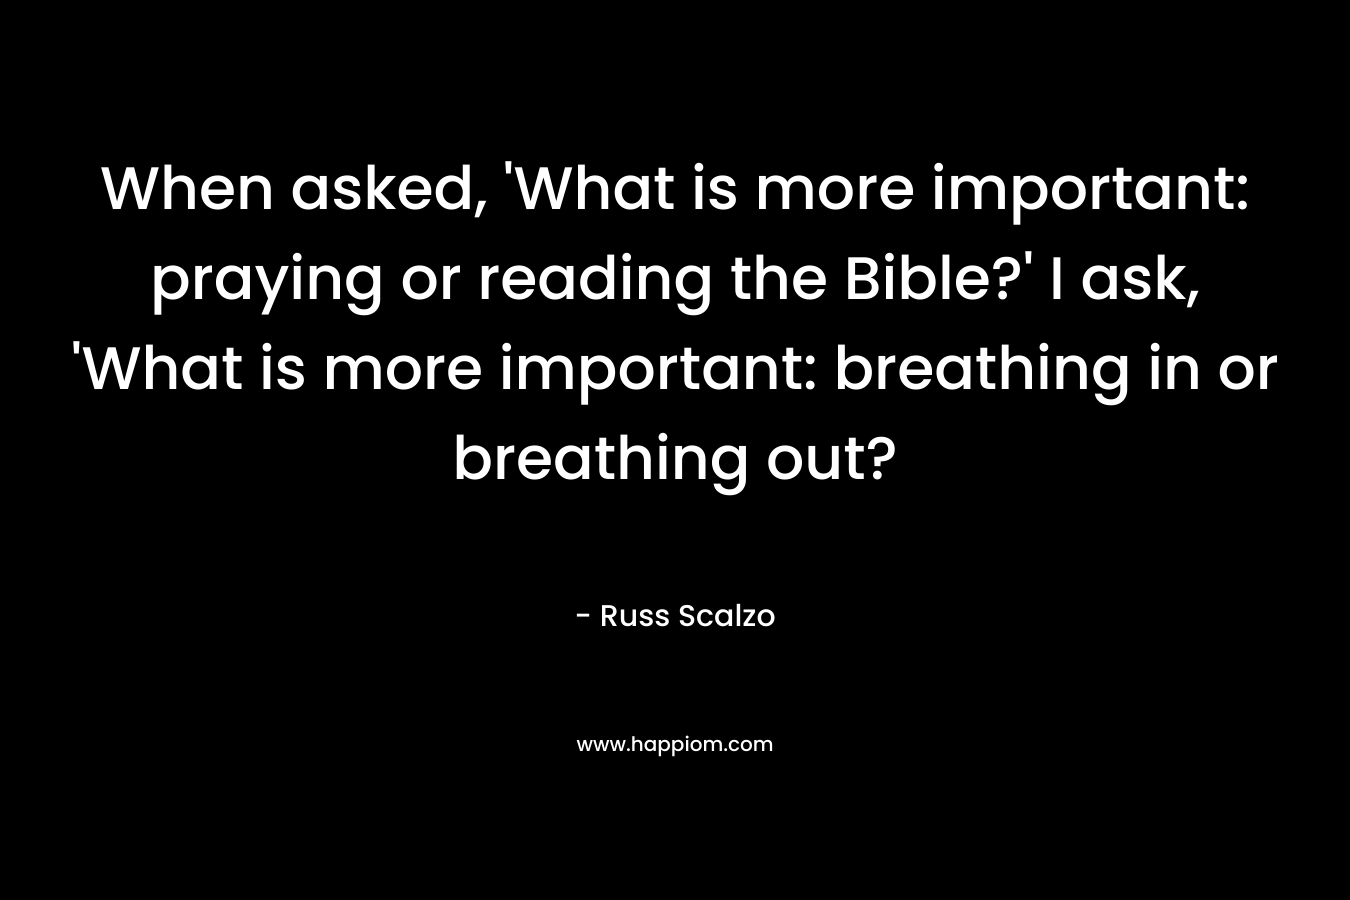 When asked, 'What is more important: praying or reading the Bible?' I ask, 'What is more important: breathing in or breathing out?